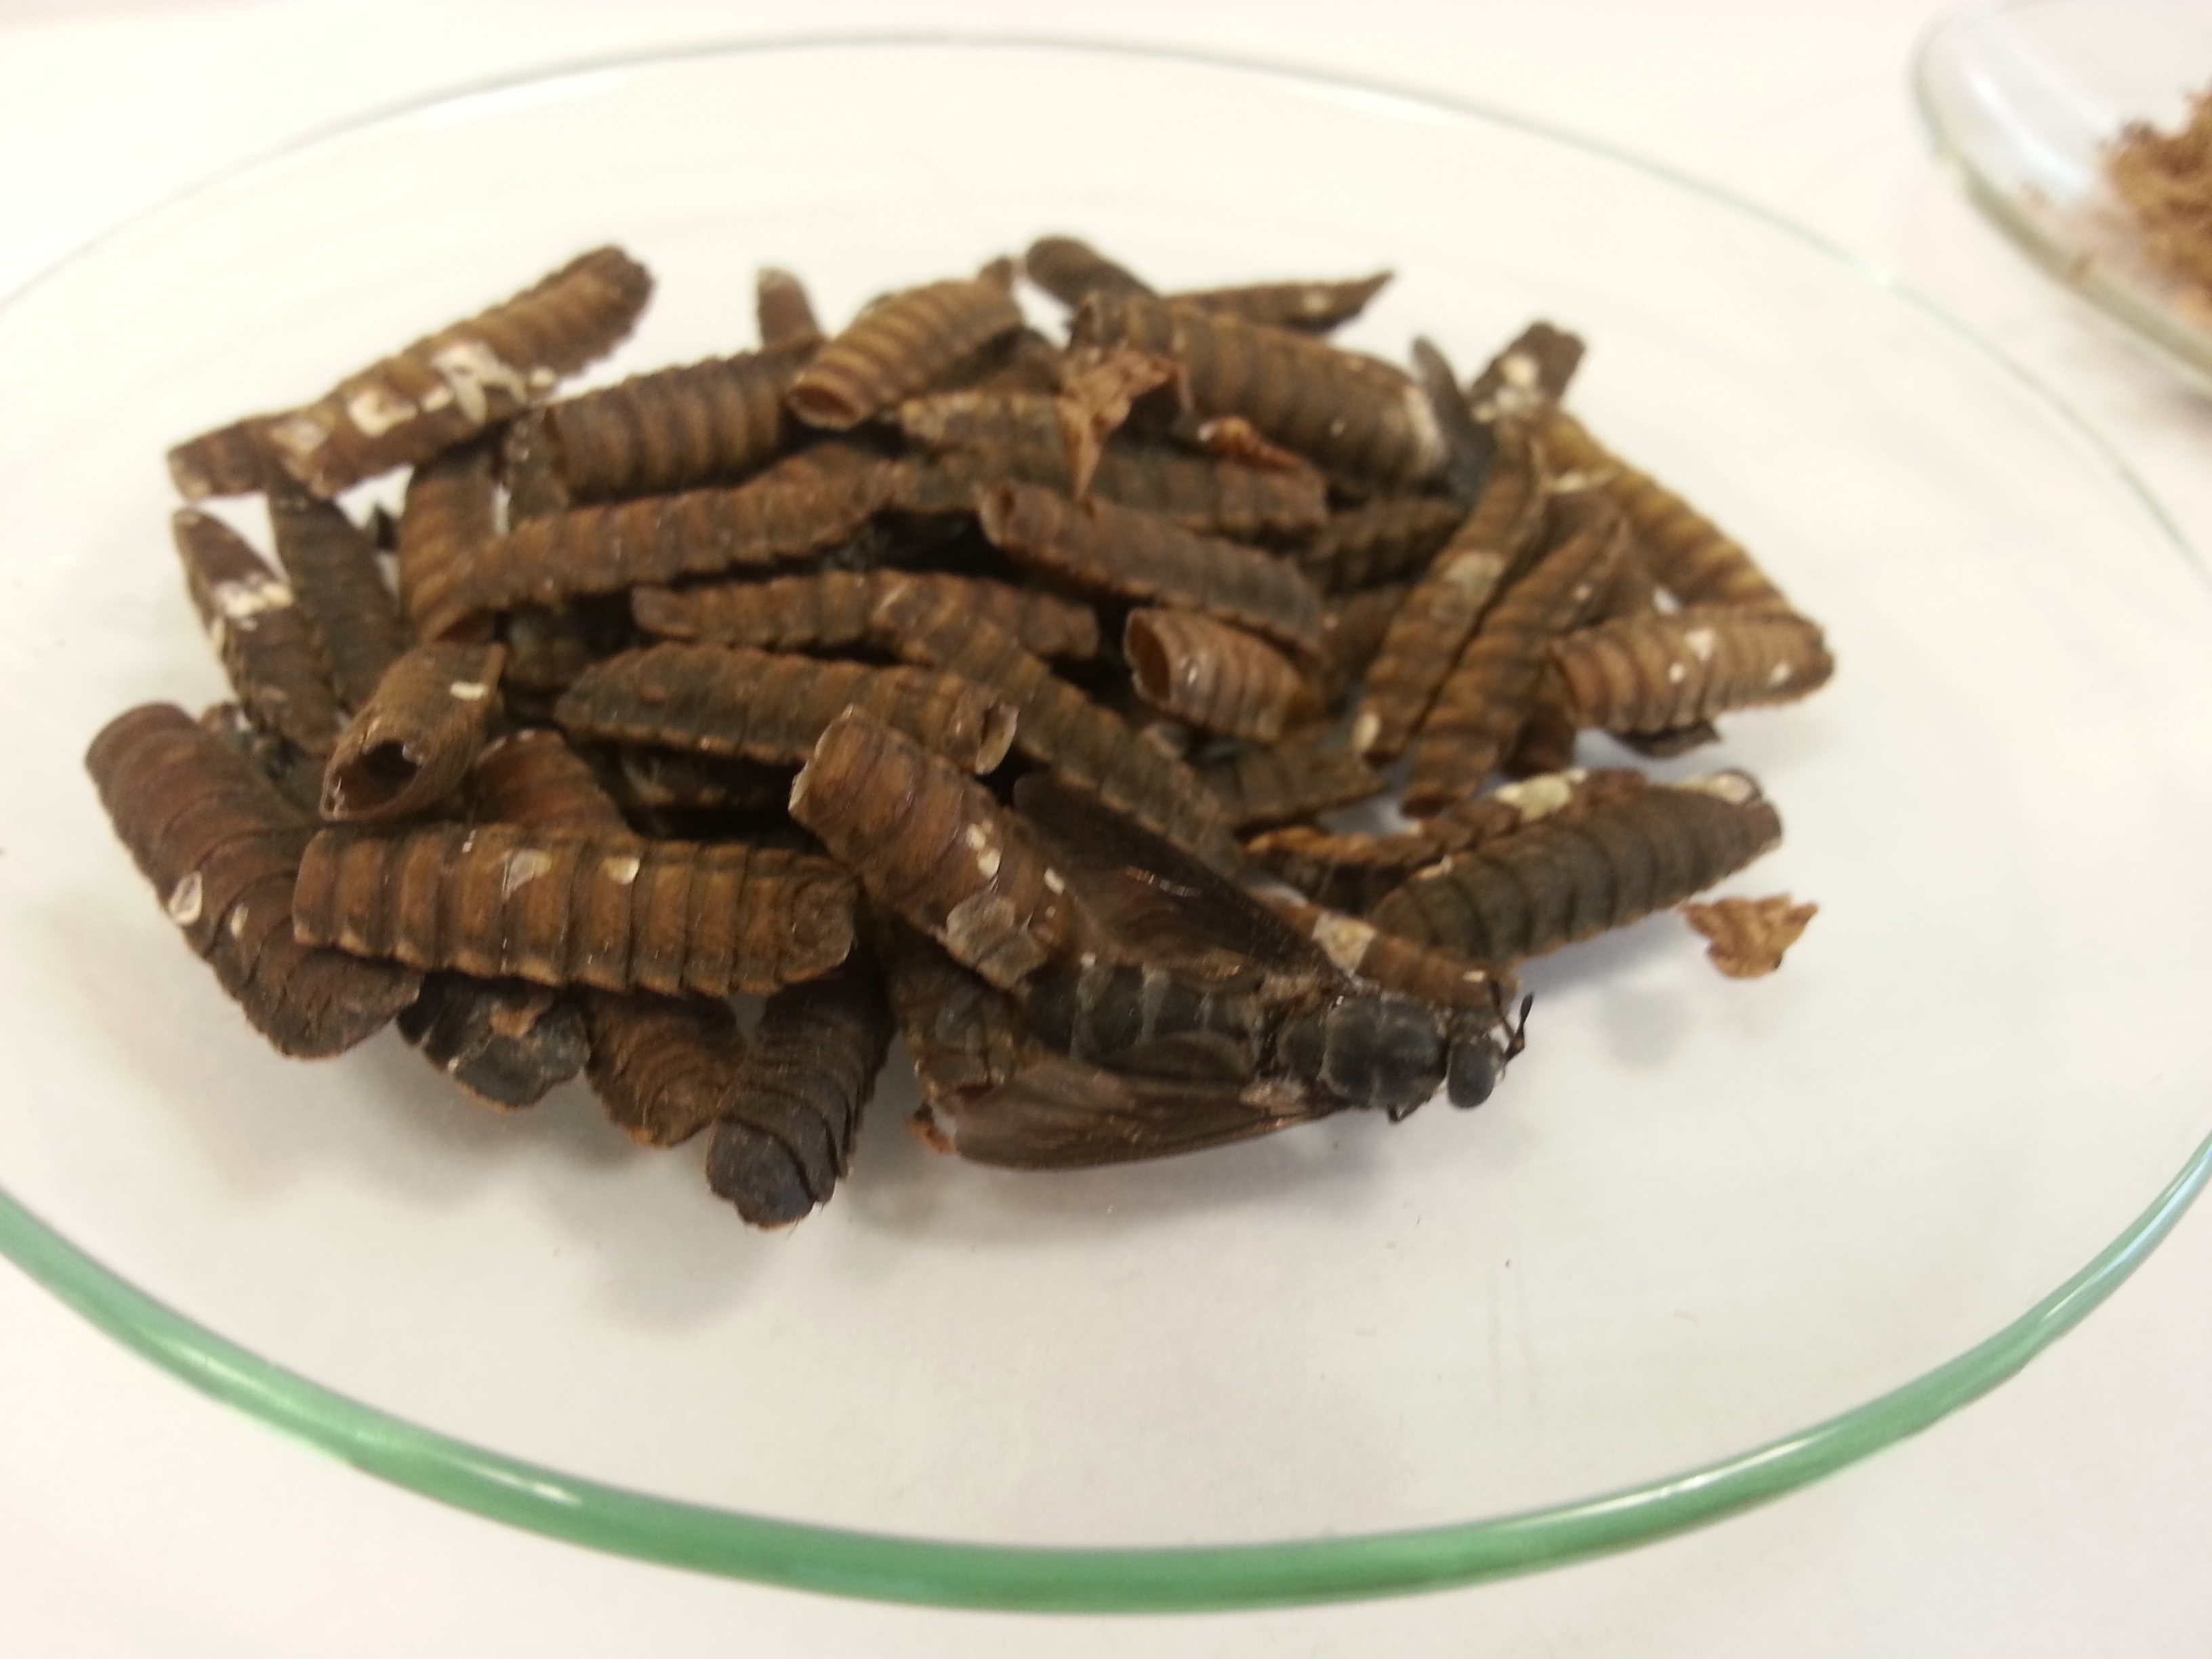 Insect cocoons as a renewable source of chitin.